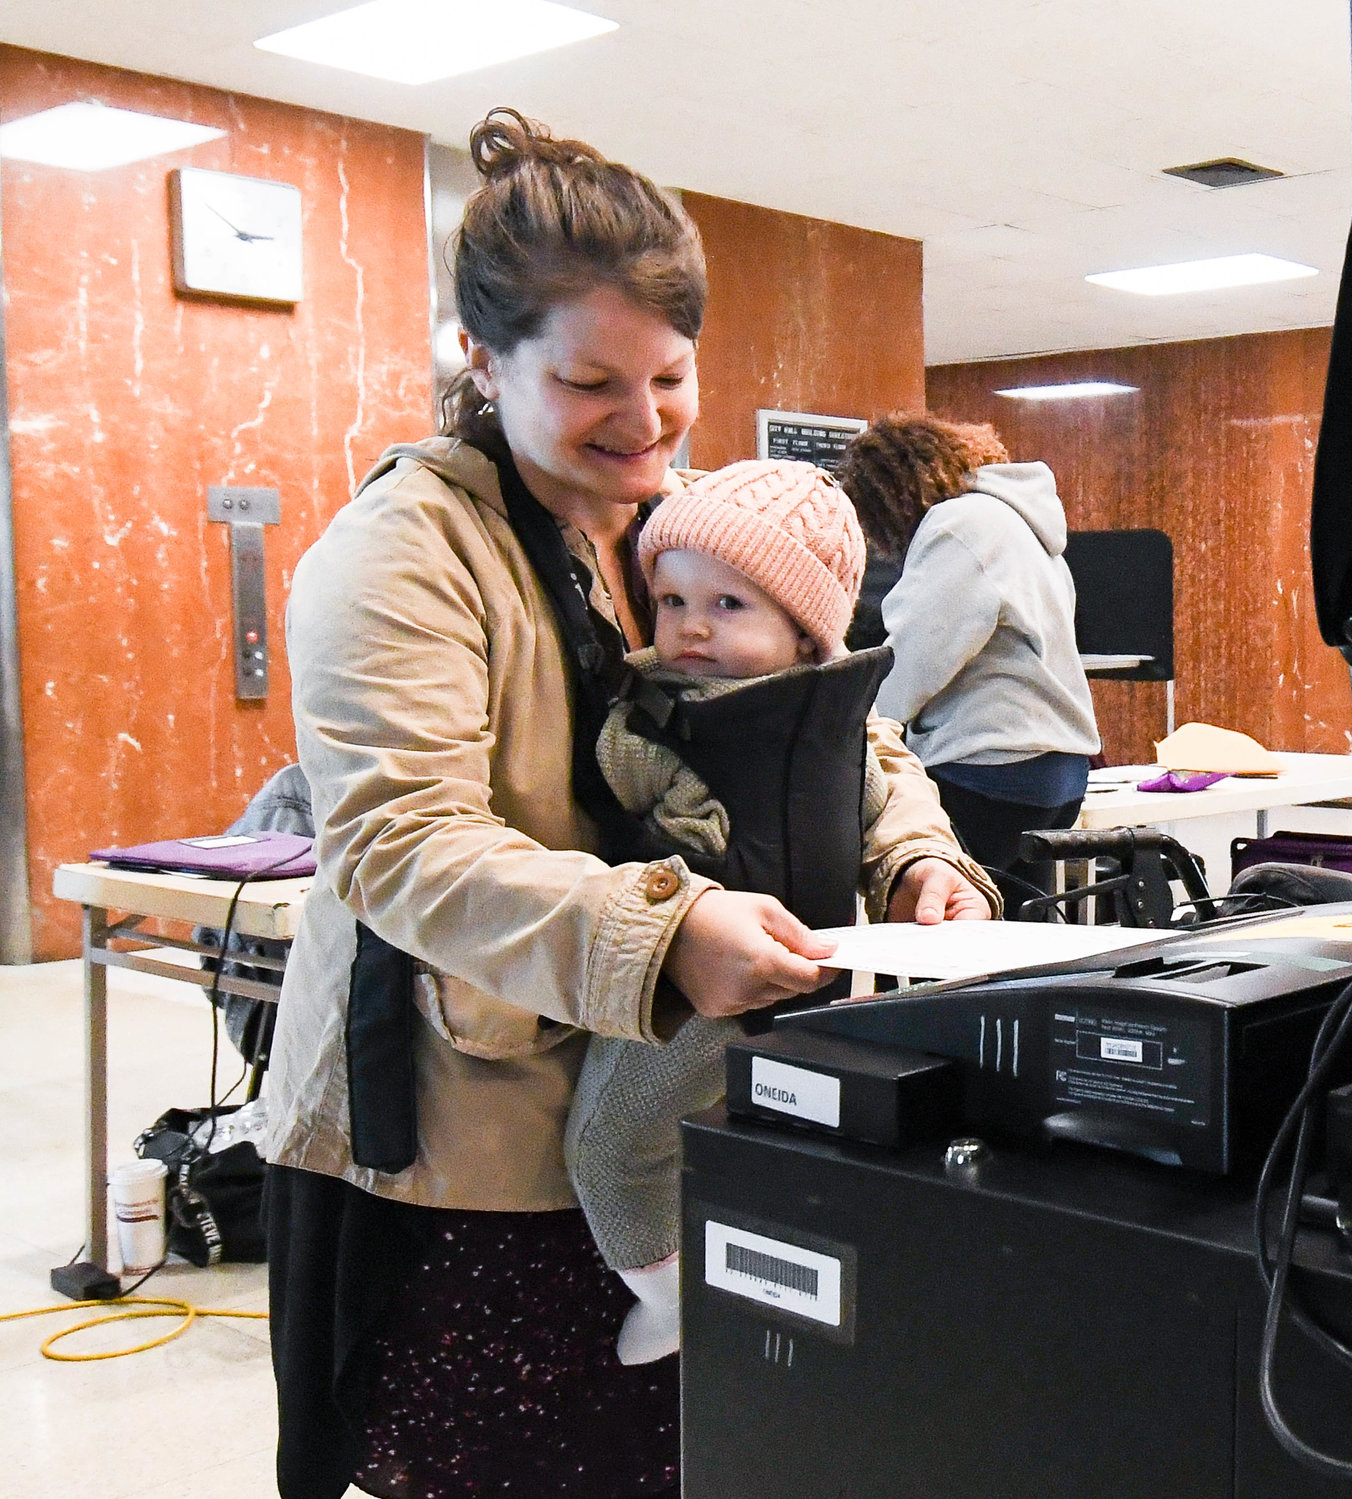 Brit Kuhl casts her ballot with her daughter at the polling station located at Utica City Hall on Tuesday. Oneida County election commissioners reported a busy day at the polls, with some 4,500 to 4,700 voters each hour going to cast their ballots across the county.